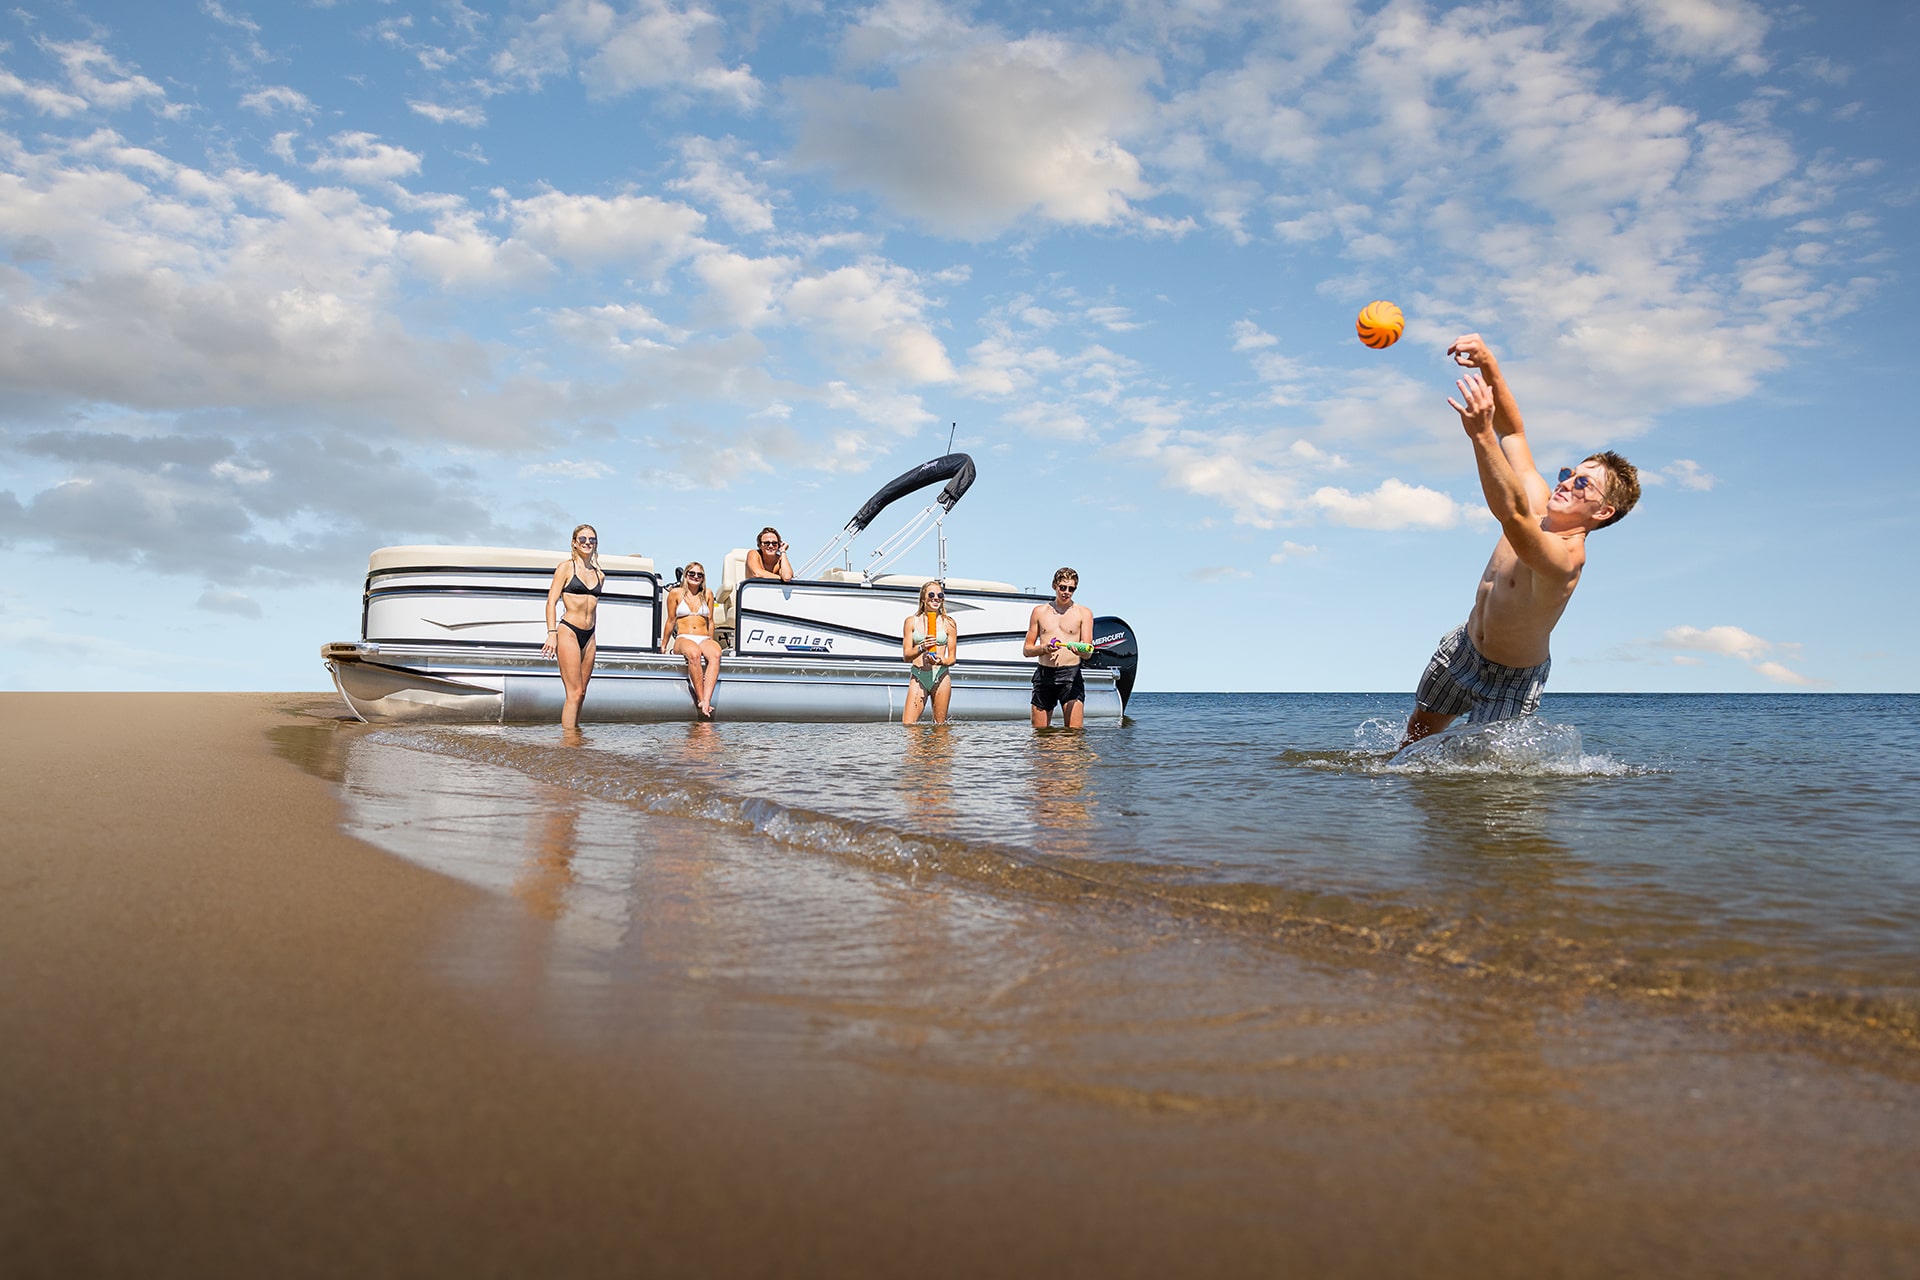 A group of young adults wearing swimsuits standing in front of a Premier tritoon that is pulled up onto a beach. A young man is diving for a thrown ball.